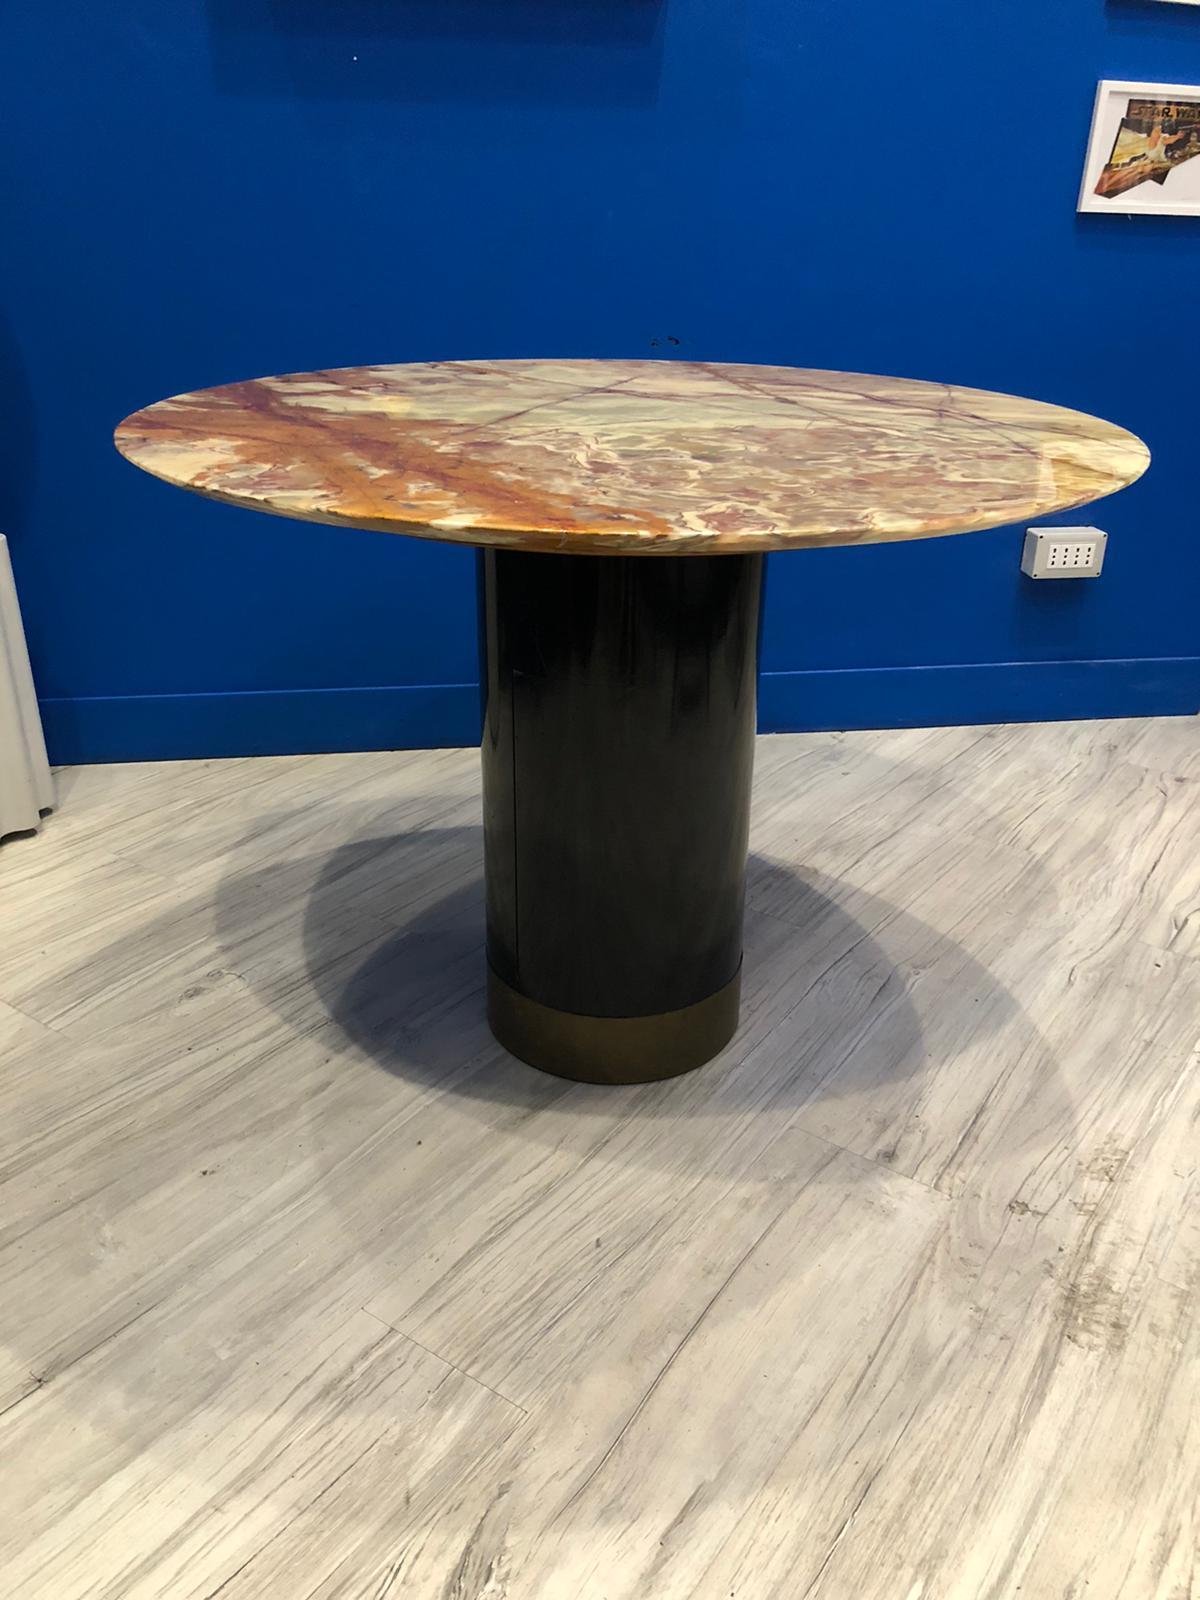 Vintage 1950s round table, Italian manufacture.
round table with a diameter of 99cm,
features an onyx marble top.
The black painted wooden base with a brass band on the lower part of the base.
Measures:
99x H 72.5cm
Small chip on the piano